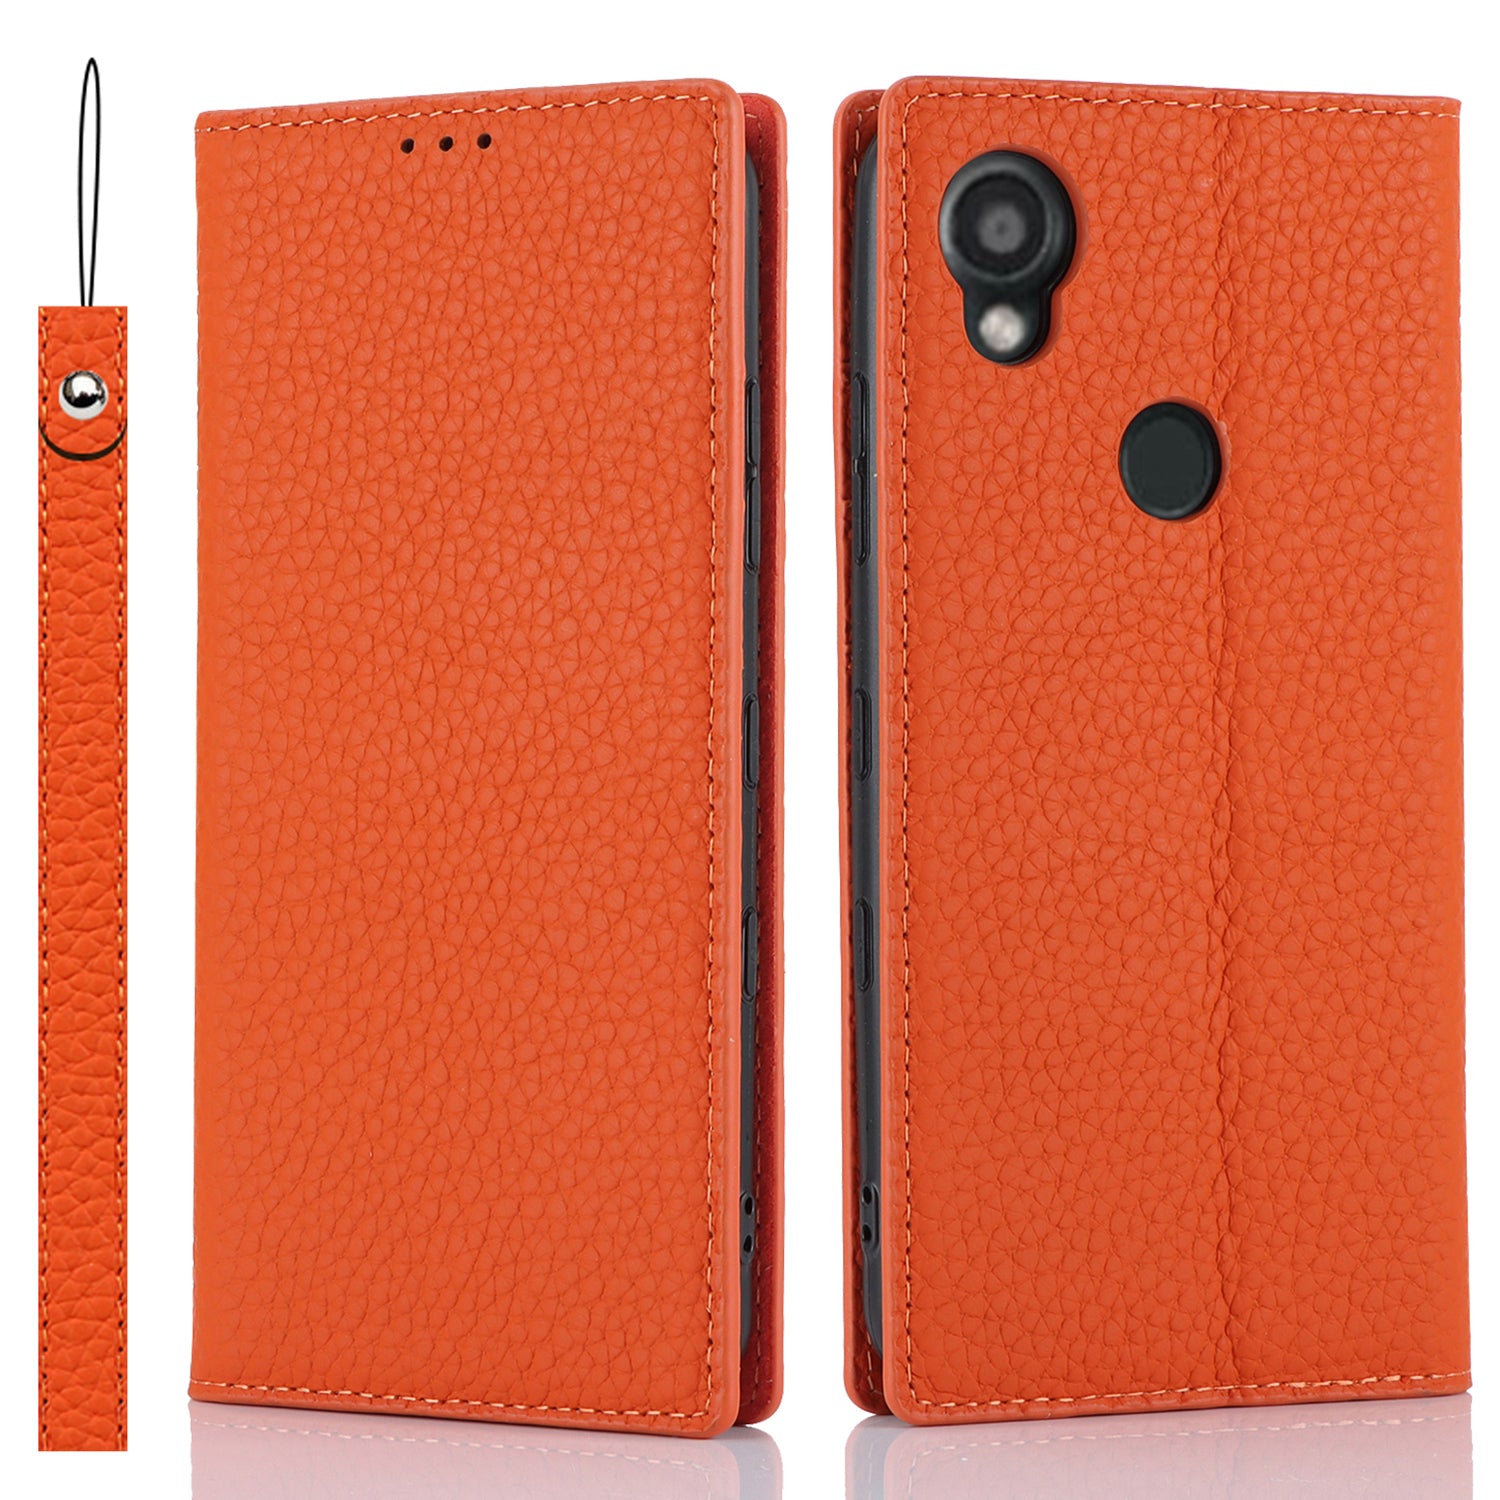 Wallet Cover for Kyocera Digno SX3 KYG02 Litchi Texture Genuine Cow Leather Phone Stand Case with Strap - Orange